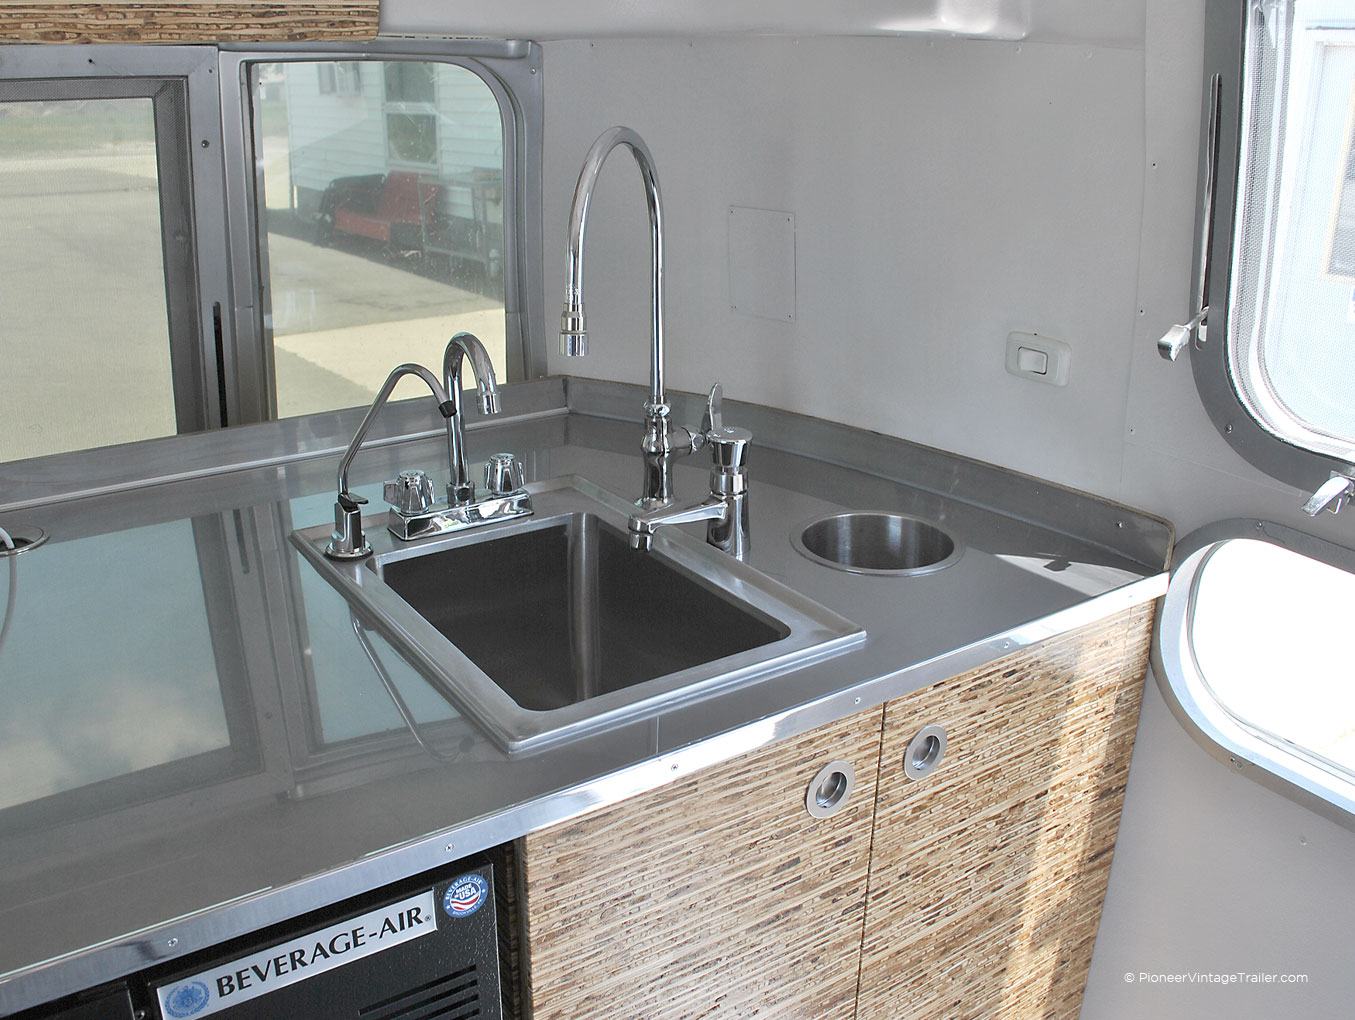 Airstream coffee trailer - sink with 4 faucets